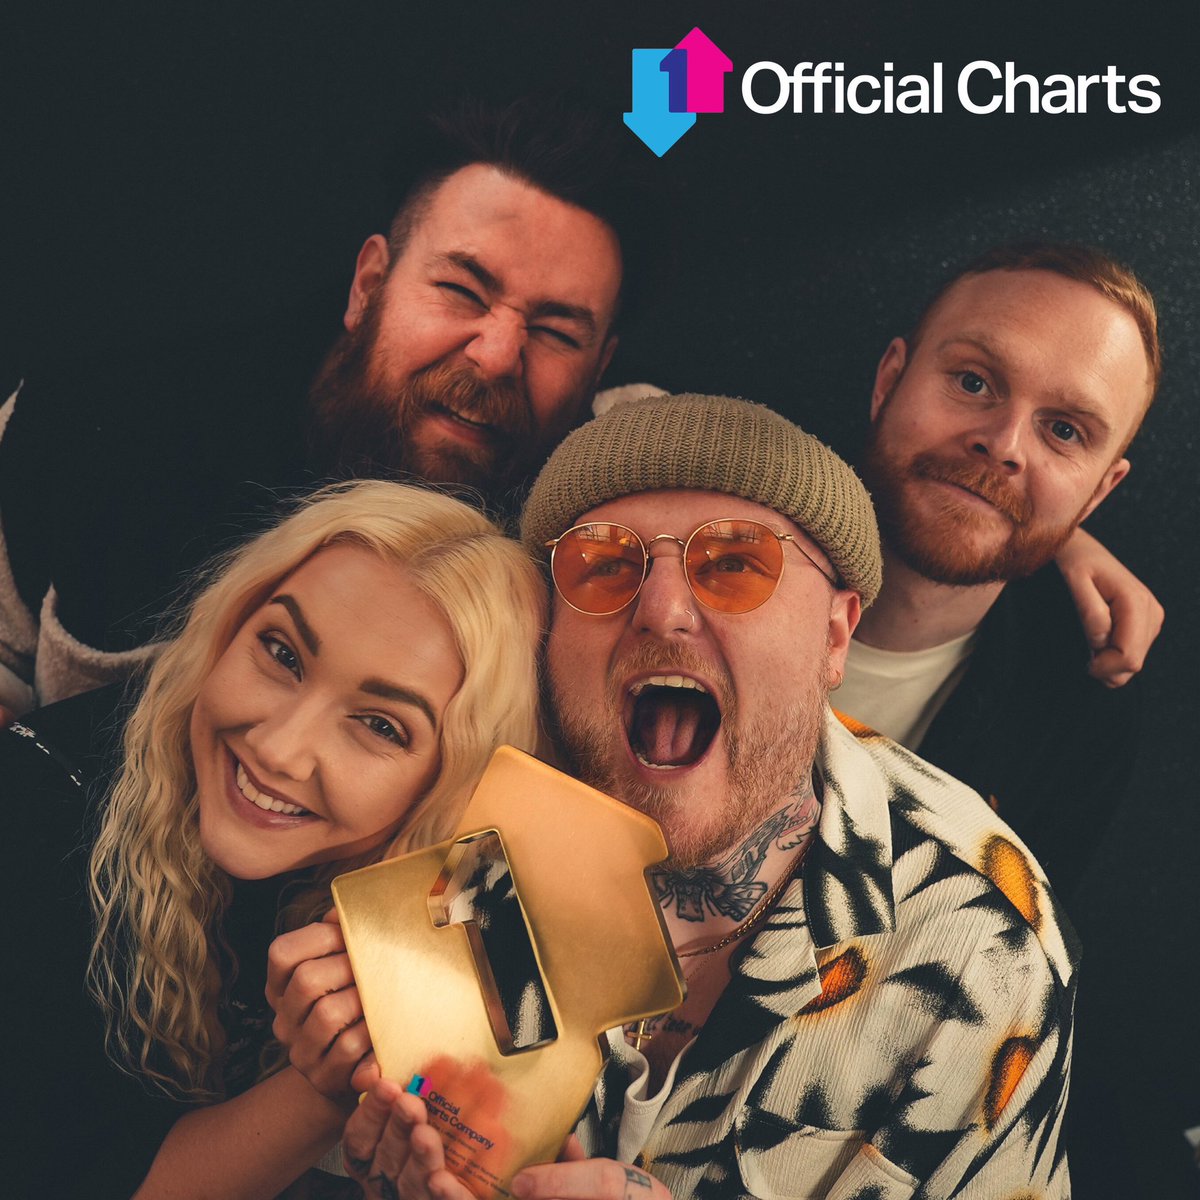 🏆 UK NUMBER ONE ALBUM 🏆

Anxiety Replacement Therapy is the Official UK Number 1 Album. This feels like a dream. 

We are now in the musical history books indefinitely.

Thank you from the bottom of our ART ❤️